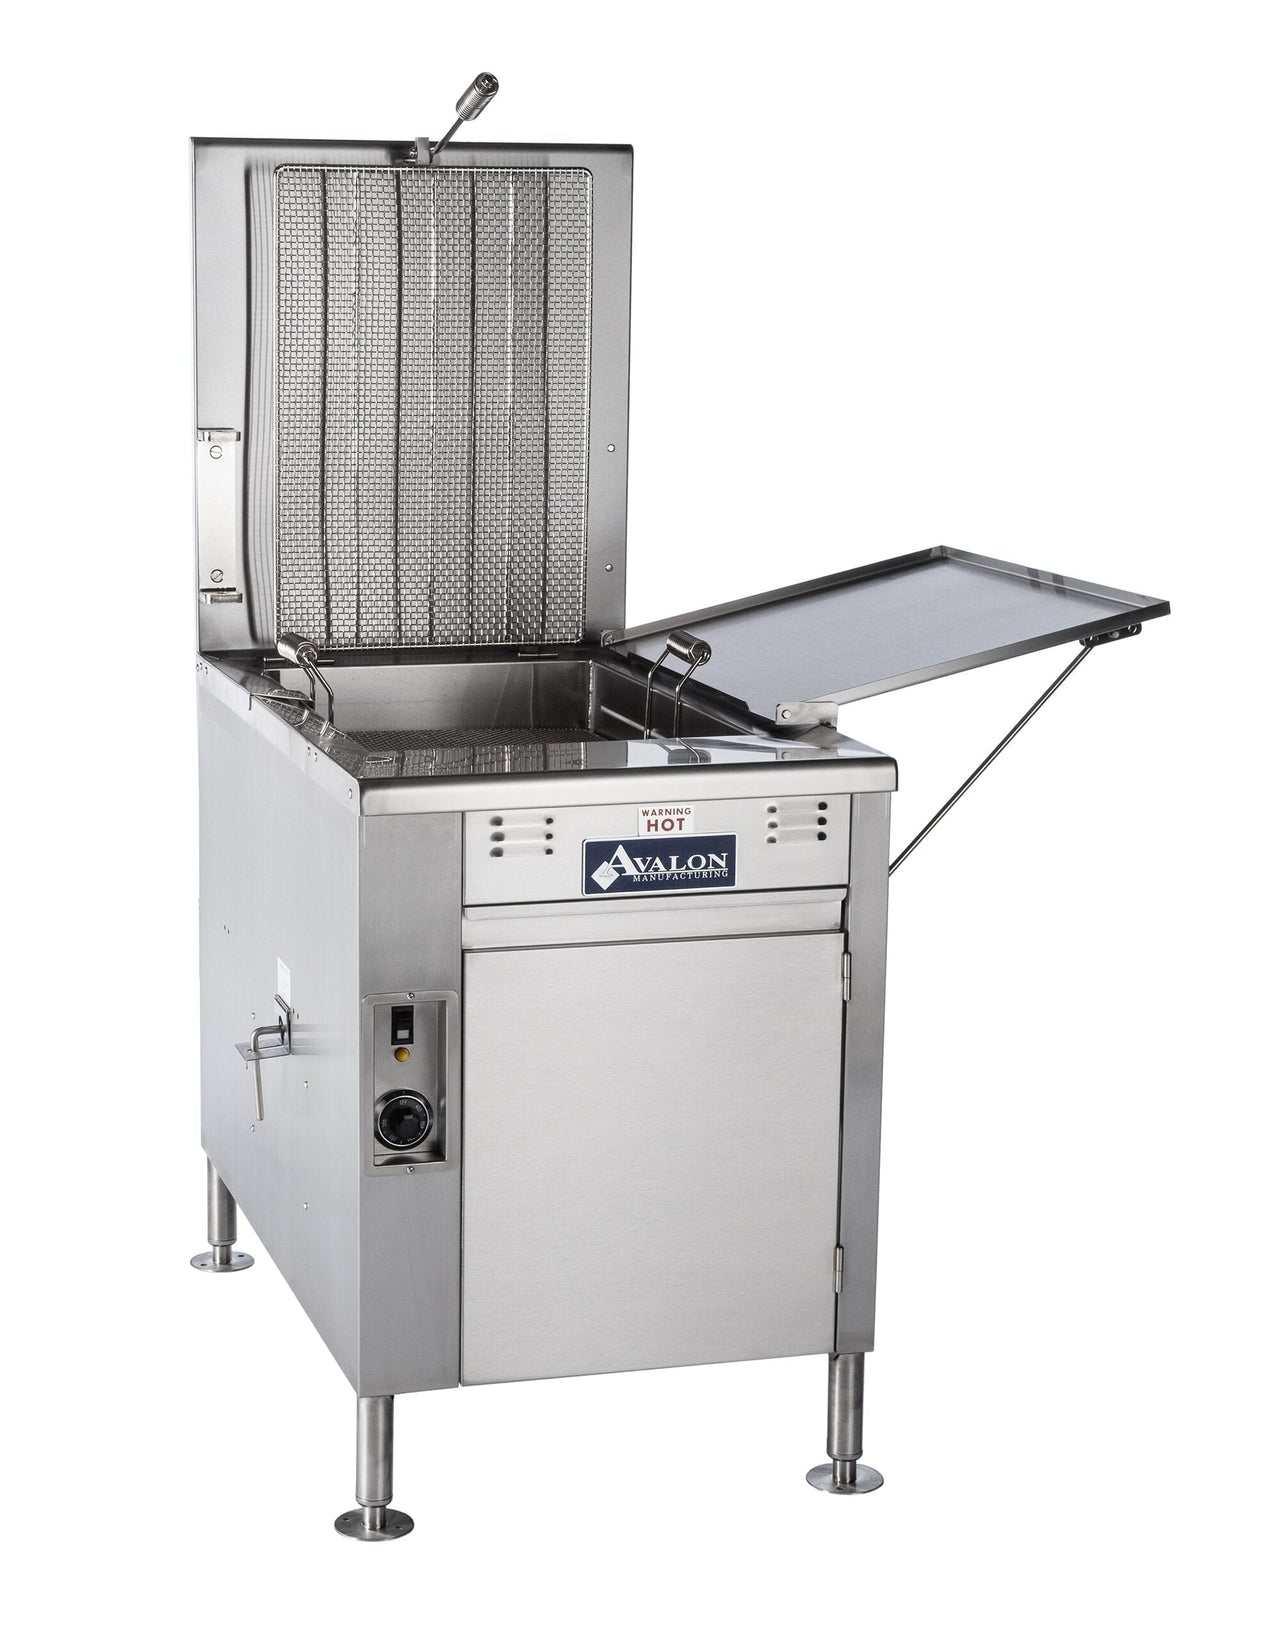 Avalon 18" x 26" Donut Fryer, Propane Gas, Electronic Ignition, Right Side Drain Board